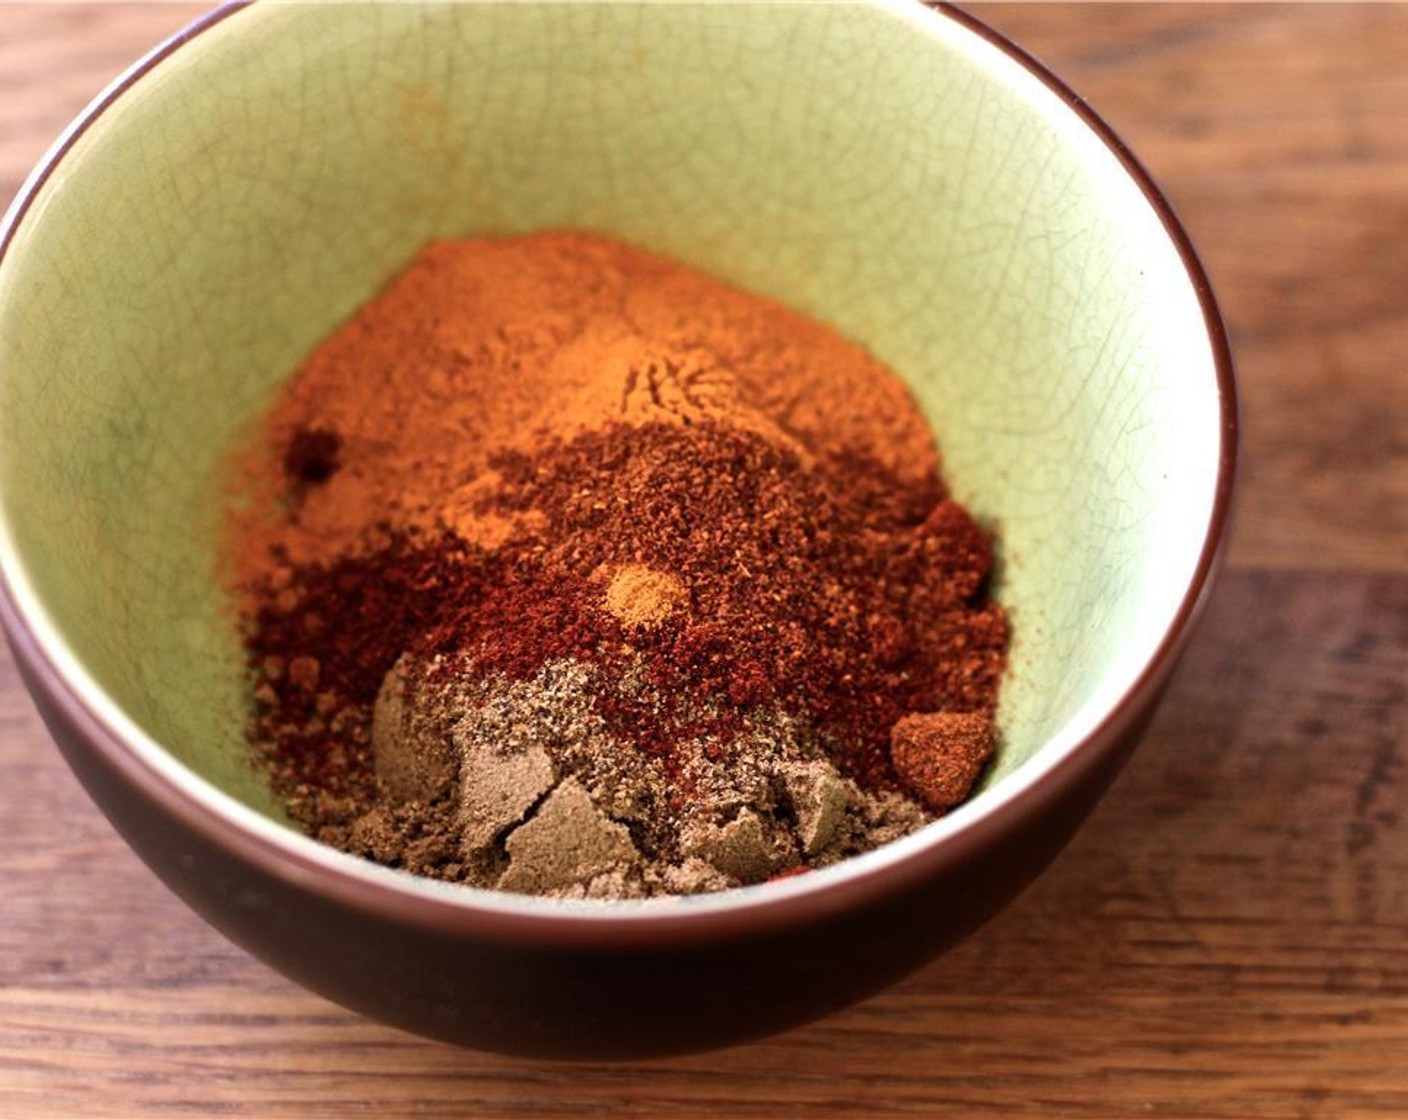 step 1 Measure out the spices: Ground Coriander (1 Tbsp), Cayenne Pepper (1/4 tsp) Garam Masala (1/2 tsp), Smoked Paprika (1 tsp), and Ground Turmeric (1 tsp) and put them in a small bowl.